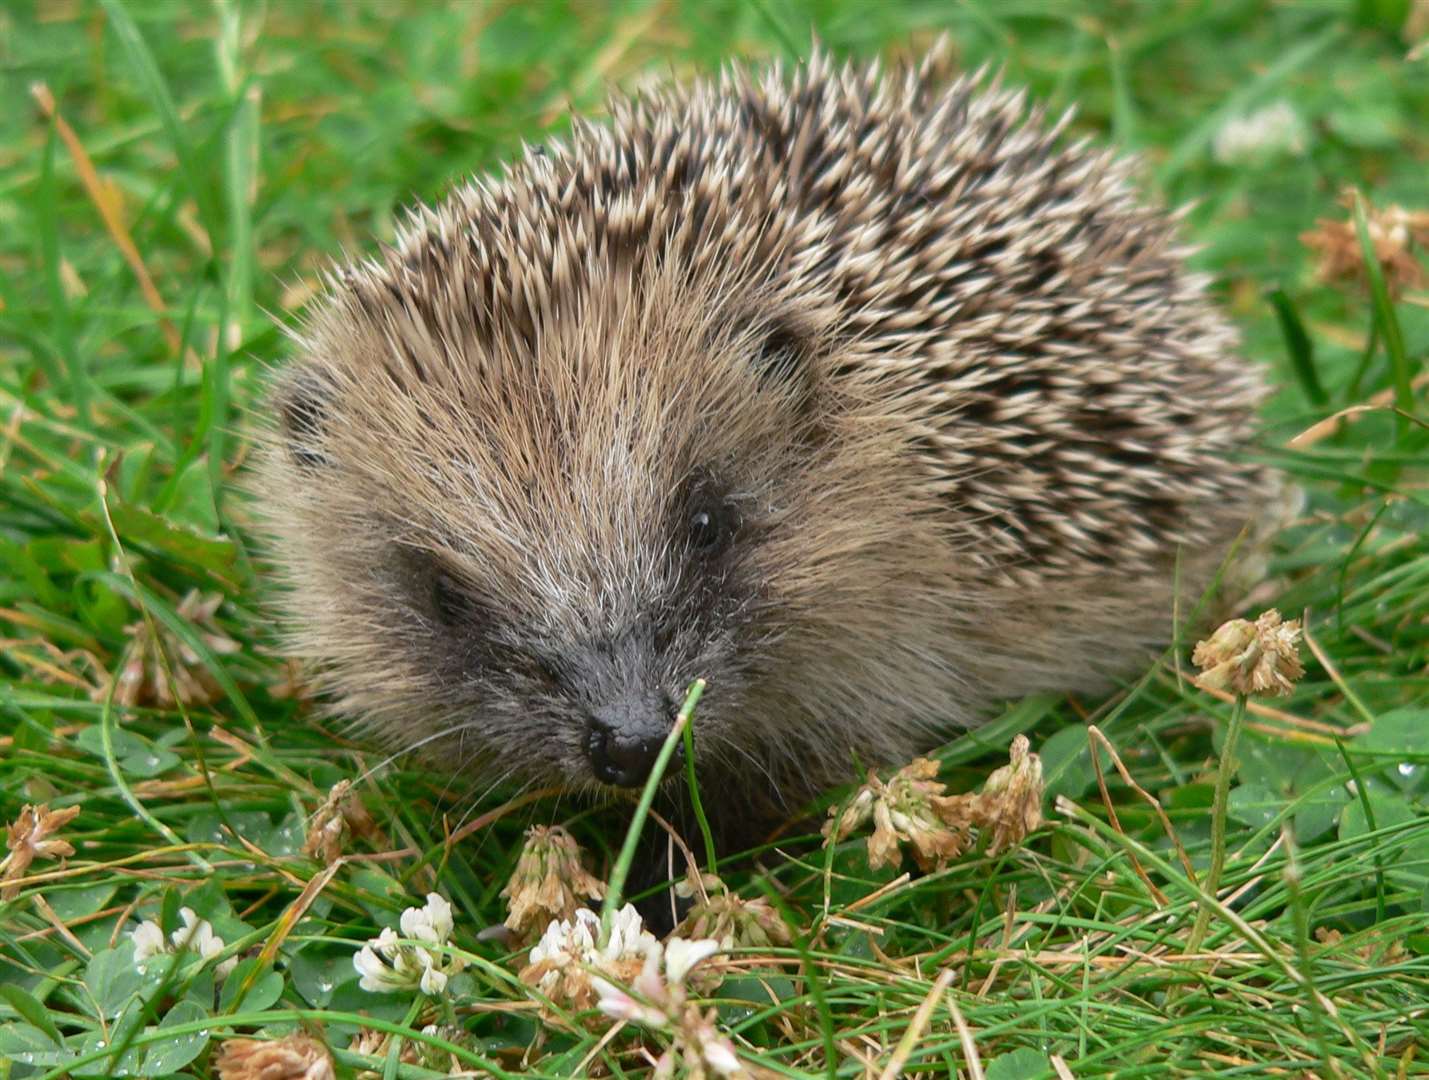 Hedgehogs will be out in force soon as their hibernation ends